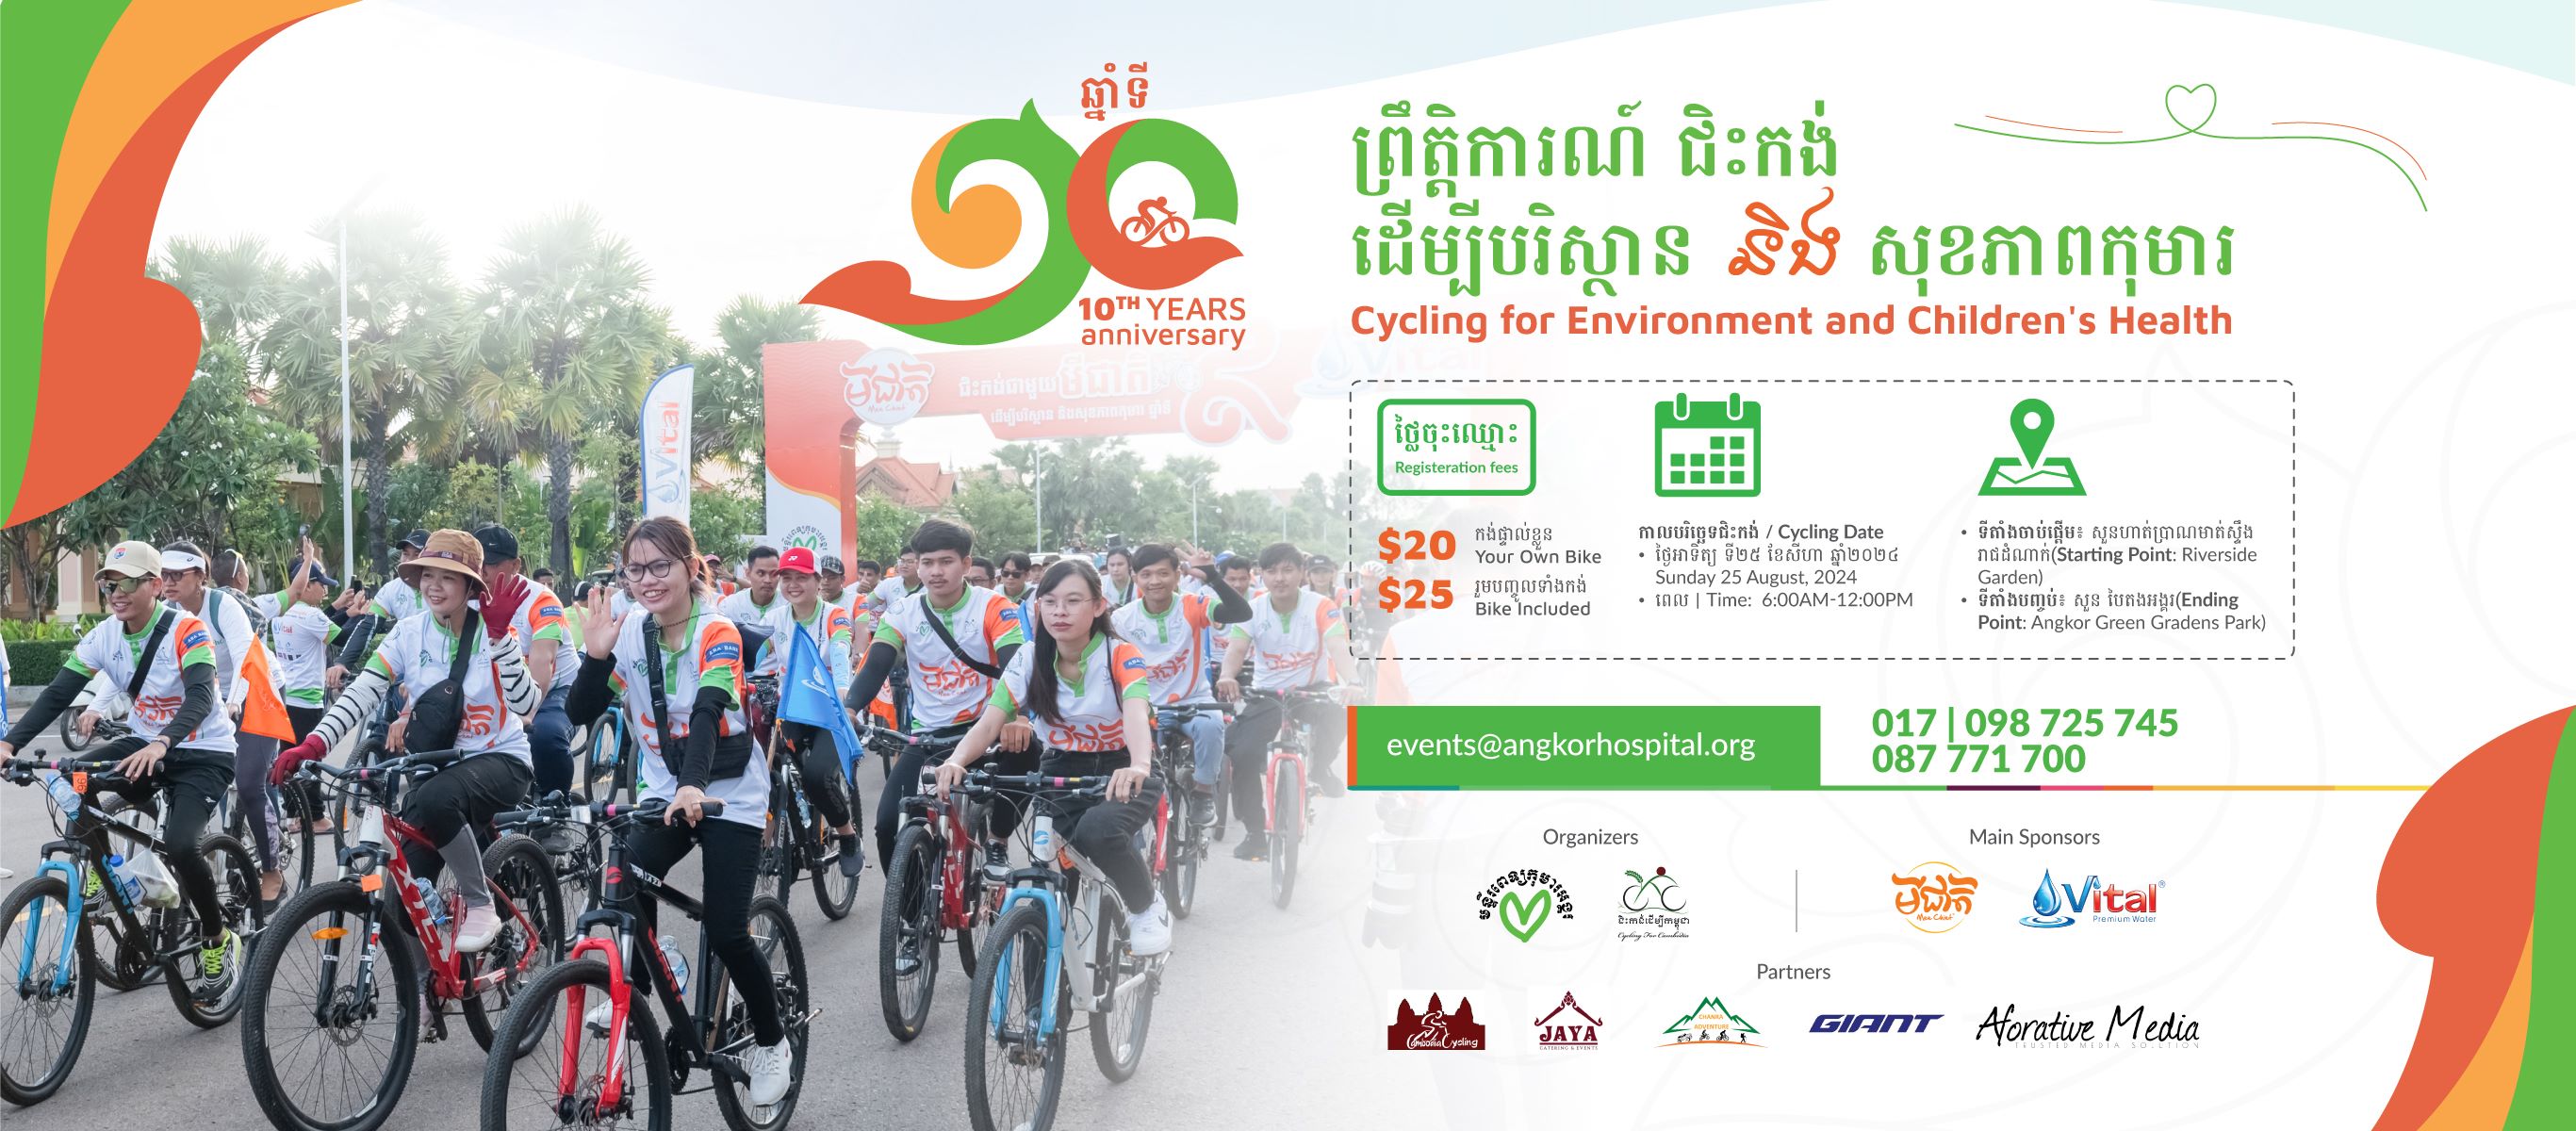 Cycling For Environment and Children's Health